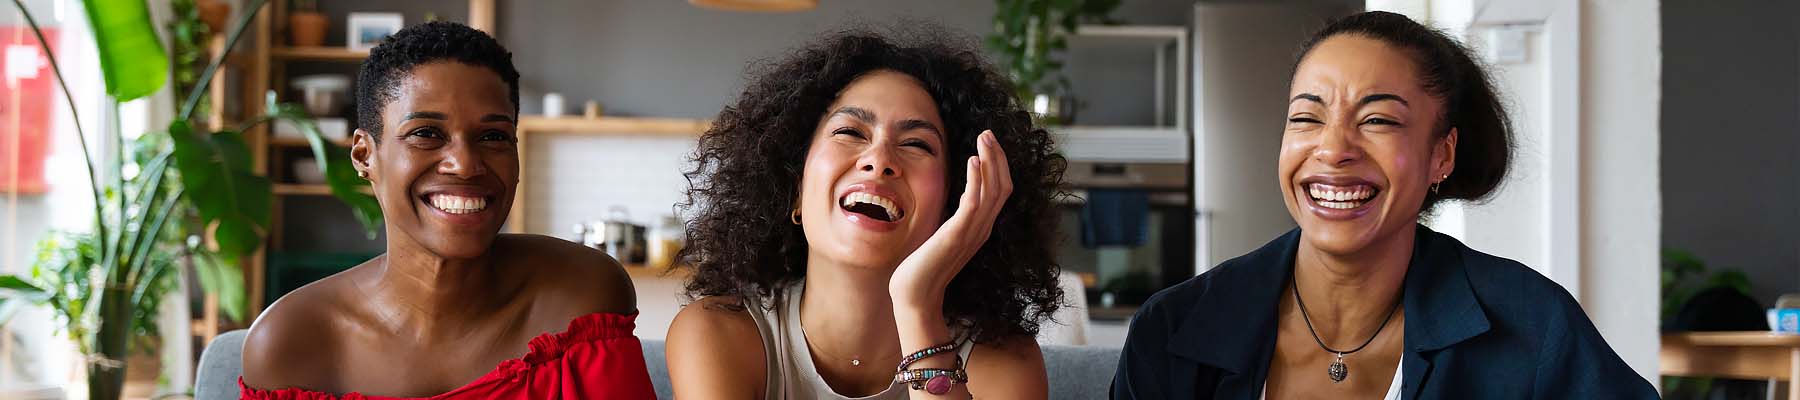 How Introverts Recharge: The Ultimate Energy Booster for Black Women at Work